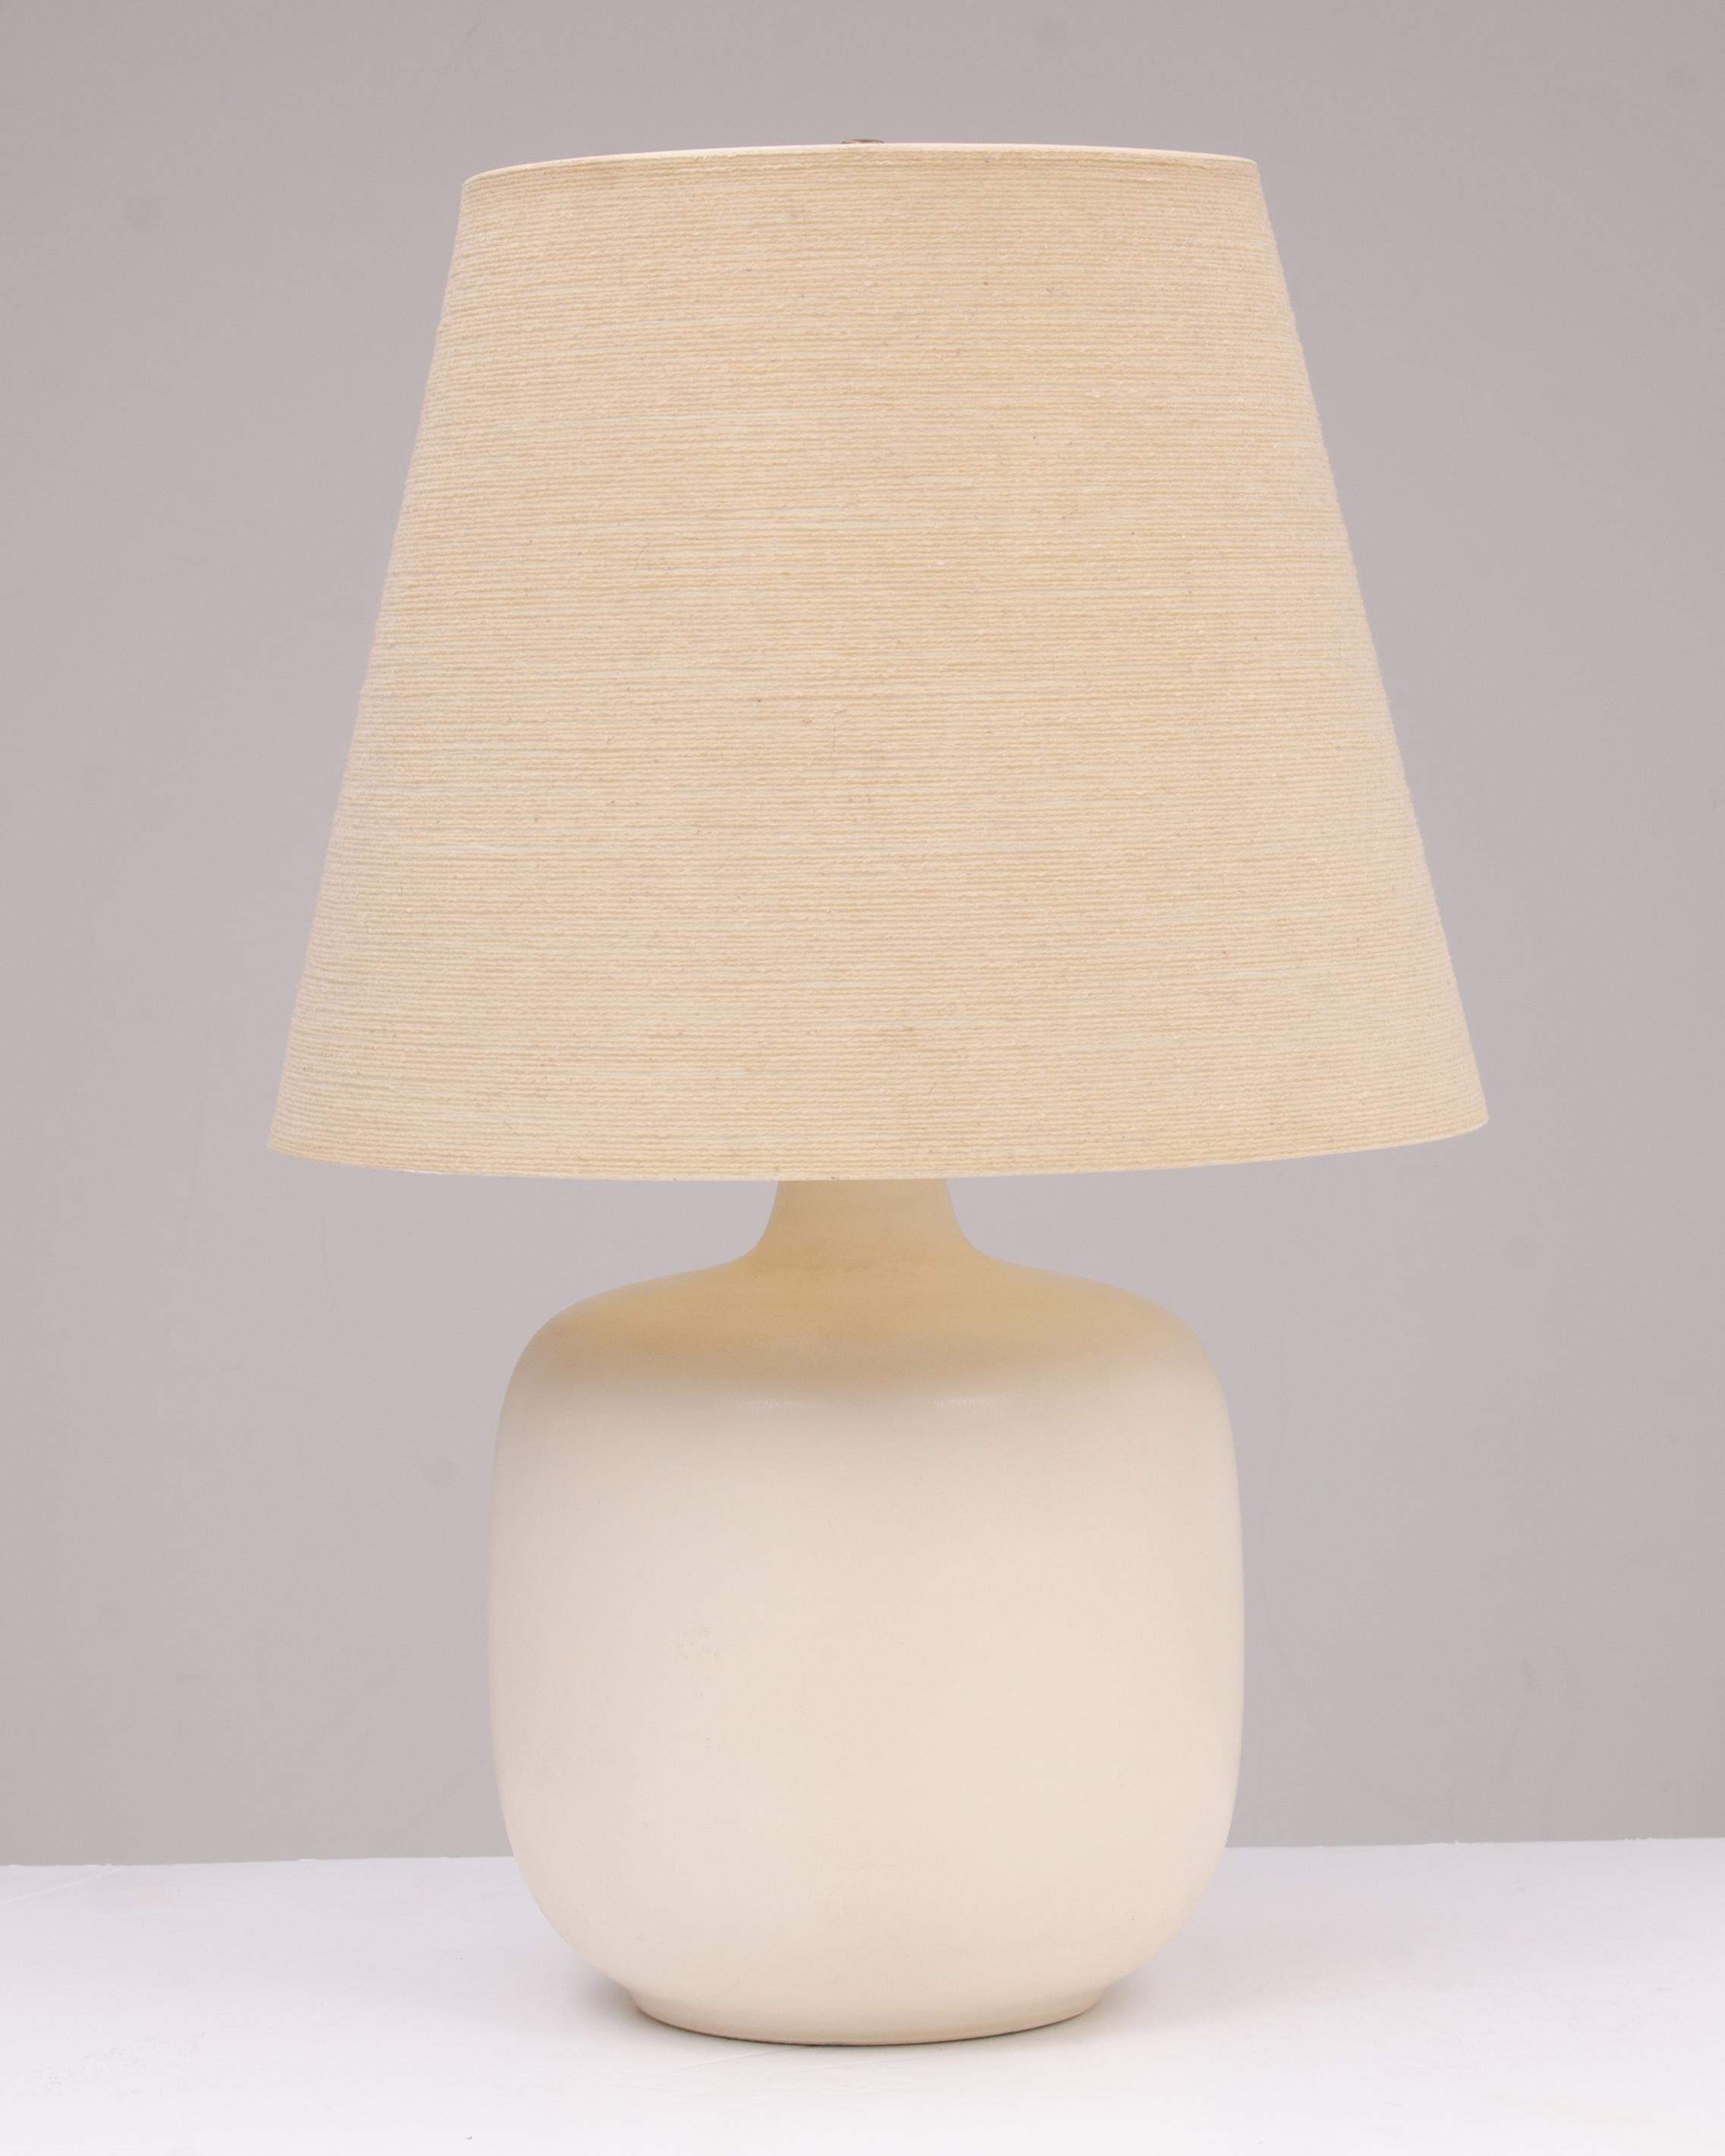 Large Lotte & Gunnar Bostlund Table Lamp Original Shade Unmarked Bone Stoneware In Good Condition For Sale In Forest Grove, PA